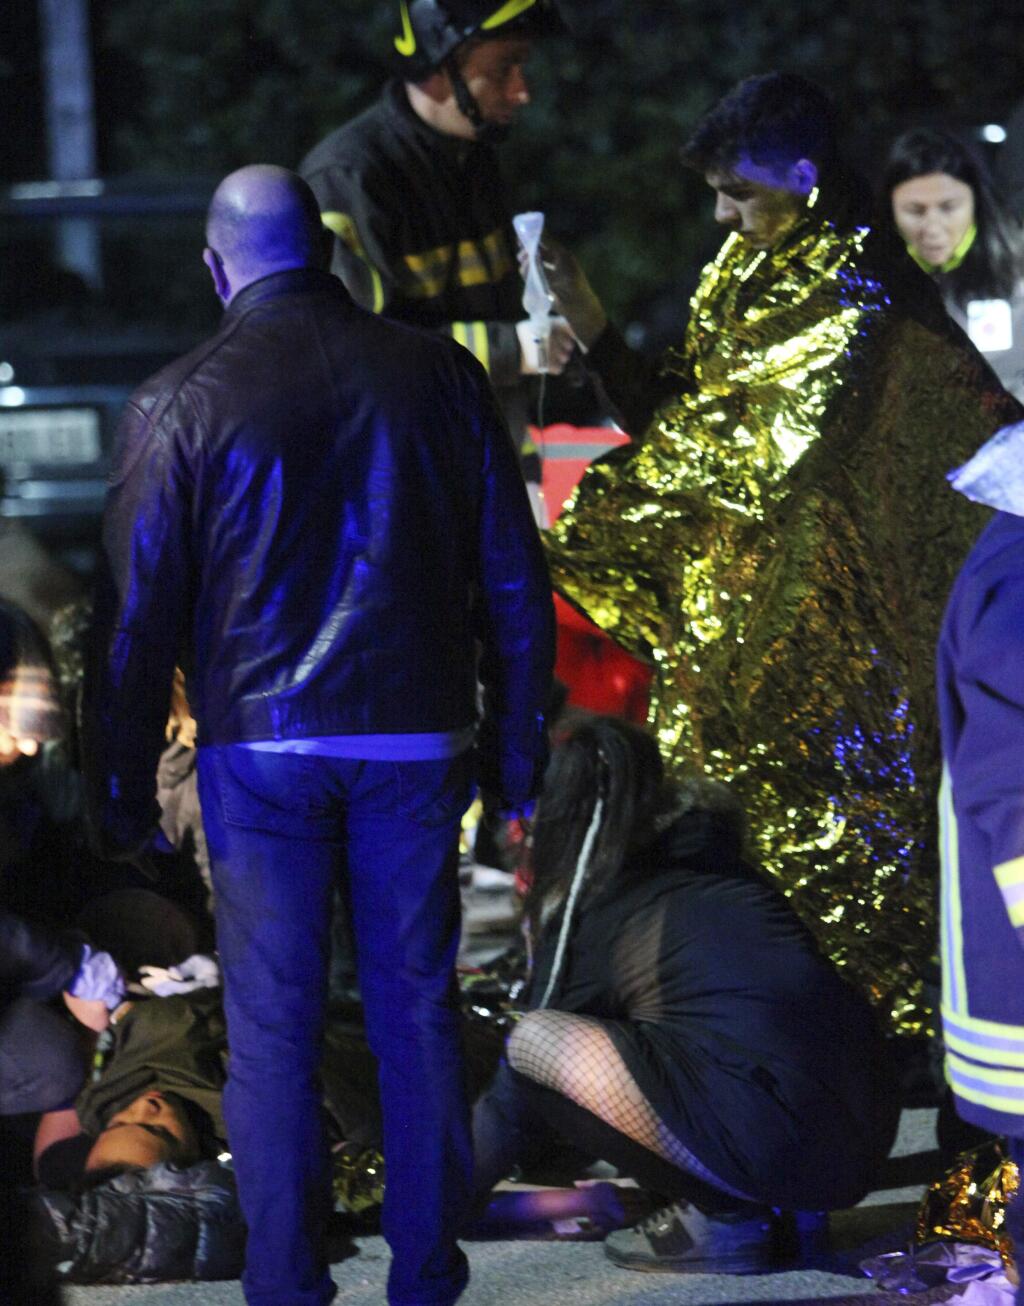 People stand in front of a bodie lying on the ground outside disco Lanterna Azzurra in Corinaldo, central Italy, Saturday, Dec. 8, 2018. A stampede at a rap concert in an overcrowded disco in central Italy killed five young teenagers and a woman who had accompanied her daughter to the event early Saturday, police said, adding that 59 people were injured. (AP Photo/Bobo Antic)